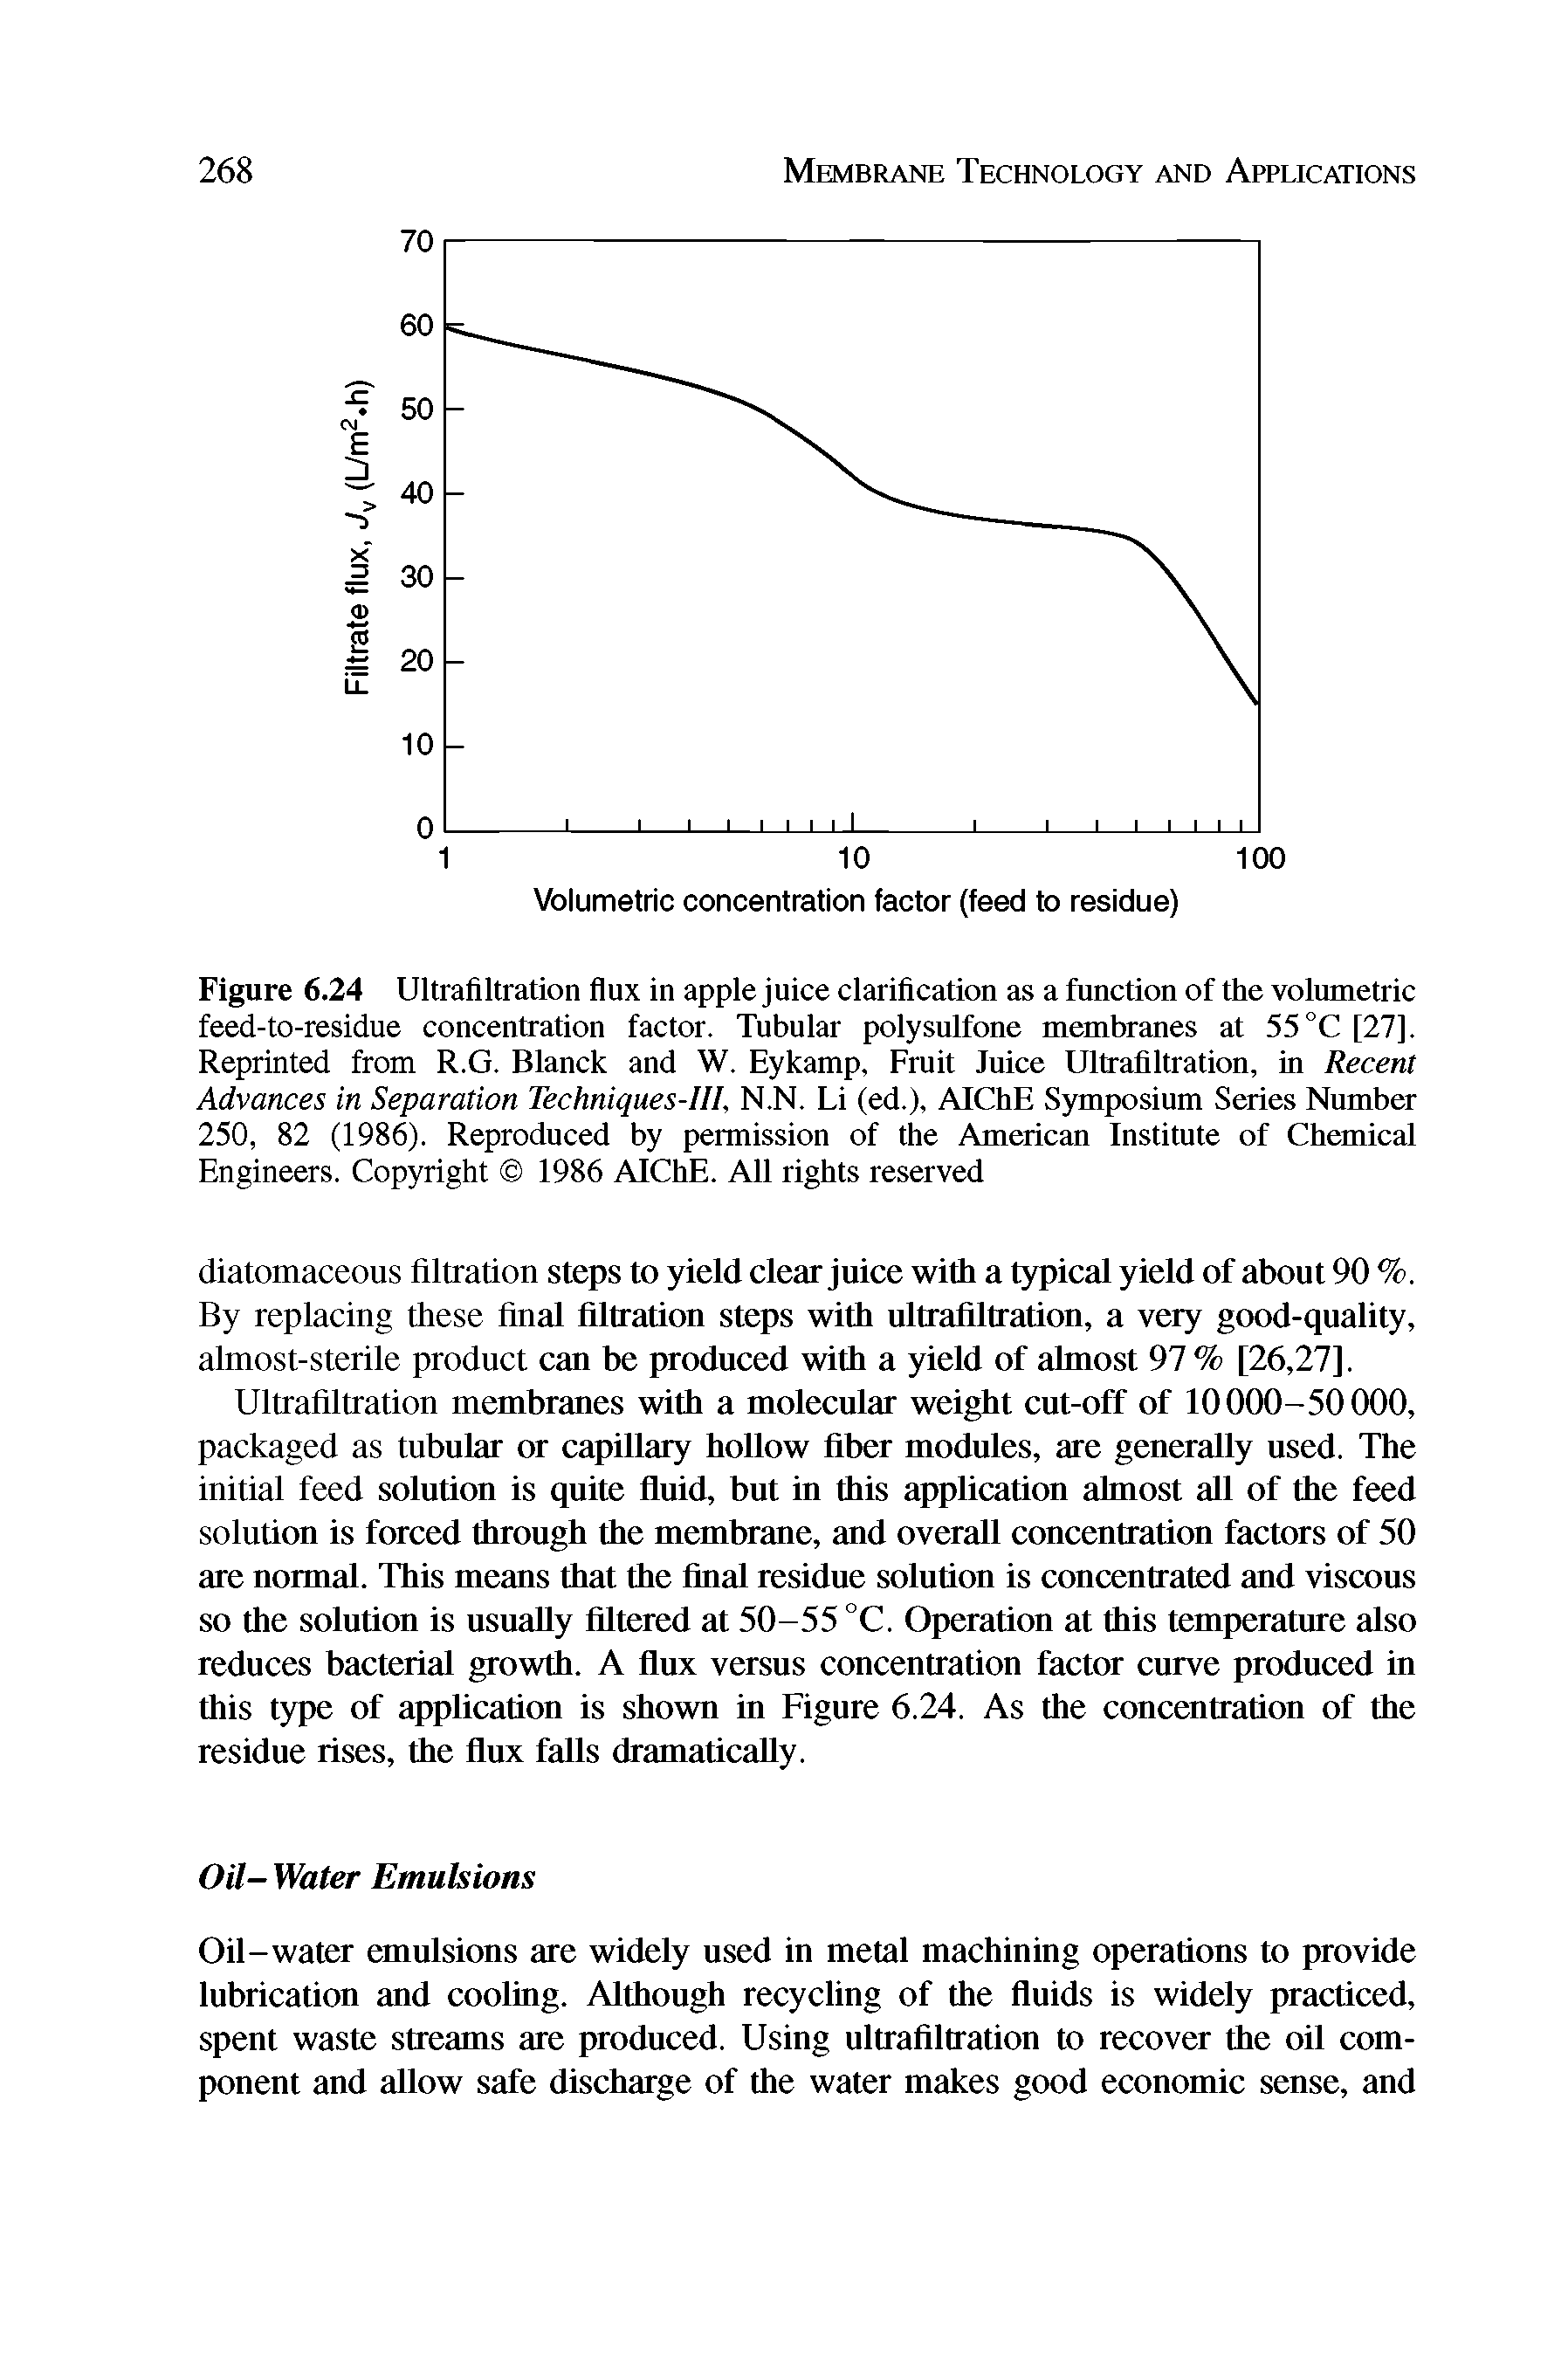 Figure 6.24 Ultrafiltration flux in apple juice clarification as a function of the volumetric feed-to-residue concentration factor. Tubular polysulfone membranes at 55 °C [27]. Reprinted from R.G. Blanck and W. Eykamp, Fruit Juice Ultrafiltration, in Recent Advances in Separation Techniques-III, N.N. Li (ed.), AIChE Symposium Series Number 250, 82 (1986). Reproduced by permission of the American Institute of Chemical Engineers. Copyright 1986 AIChE. All rights reserved...